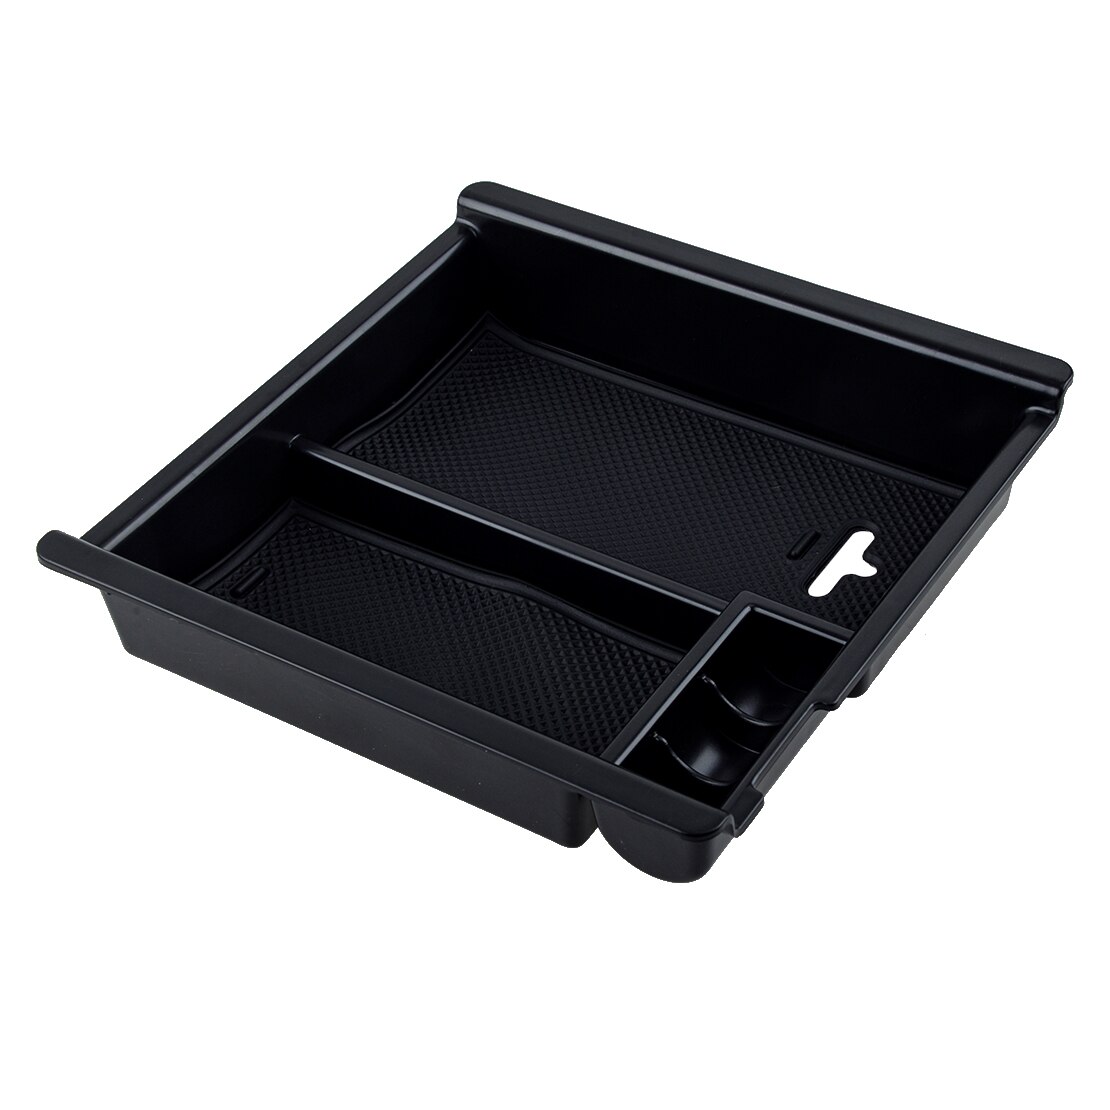 Auto Black Center Console Armsteun Opbergdoos Organizer Houder Lade Fit Voor Toyota Tacoma